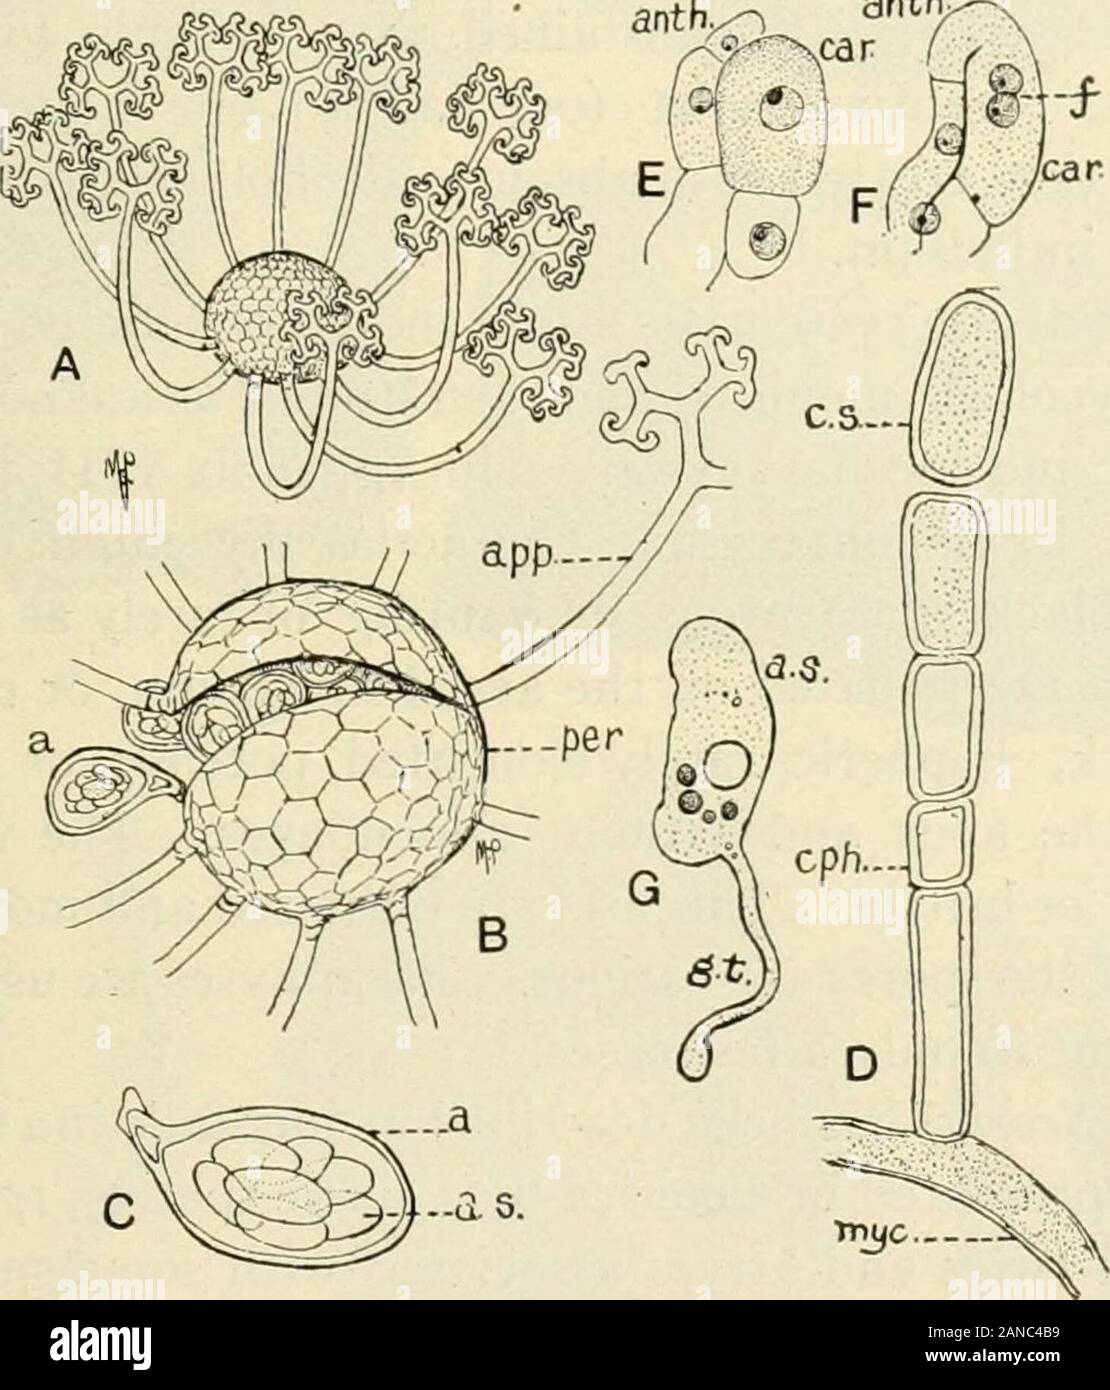 A text-book of mycology and plant pathology . Pig. 53.— Mildew of chestnut leaves due to Phyllaclinia corylei with ascus andperithecium to left. (Martic Forge, Pa., Nov. 2, 1915-) MILDEWS AND RELATED FUNGI 157 sphcera (Fig. 54) dichotoniously branched. These appendages prob-ably assist in the distribution of the perithecium, serving to attachthe perithecia to plants, if wind-l)orne, or to the bodies of insects bywhich they are carried to other plants. The number of asci found in aperithecium and the number and character of the spores in the ascivary generically (see Appendix VIII, pages 721-72 Stock Photo